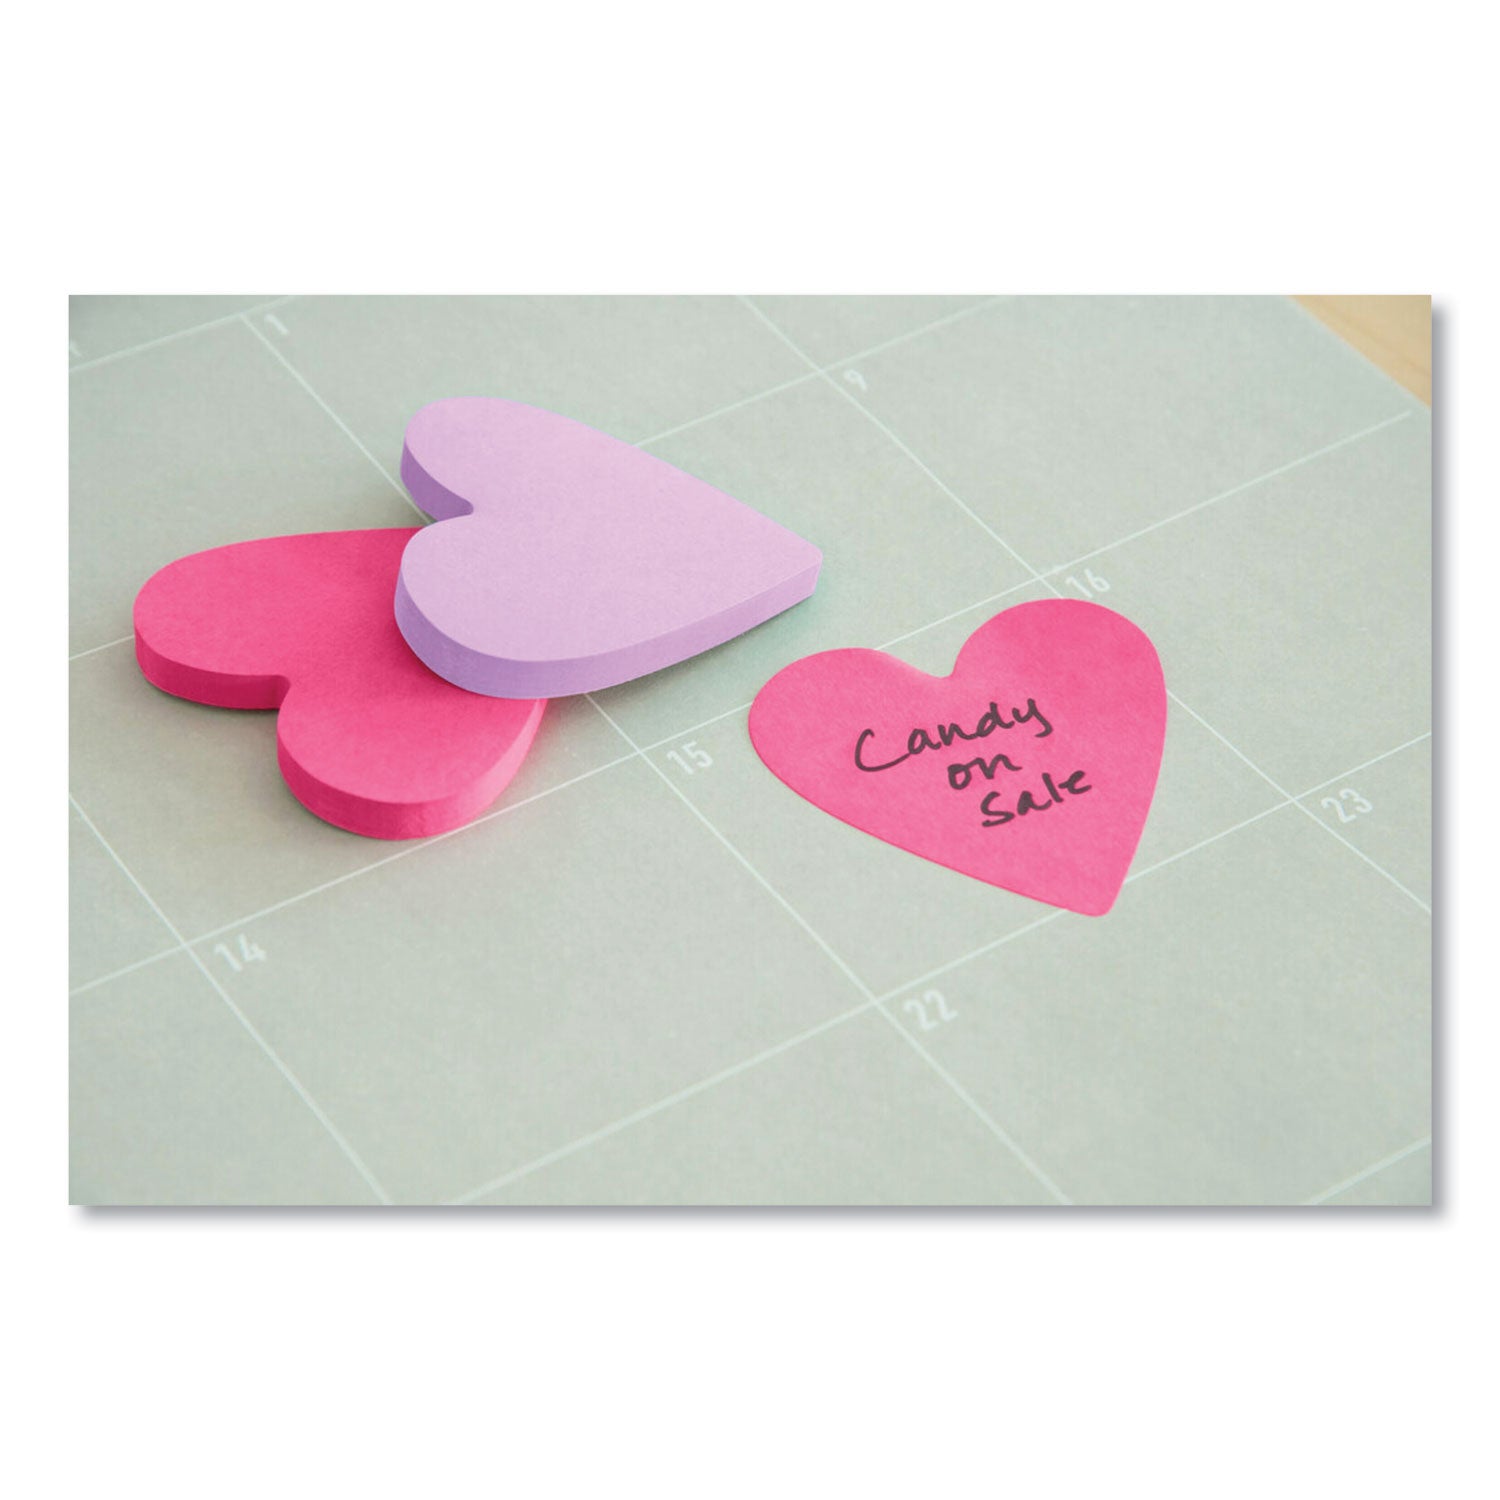 die-cut-heart-shaped-notepads-3-x-3-pink-purple-75-sheets-pad-2-pads-pack_mmm7350hrt - 3